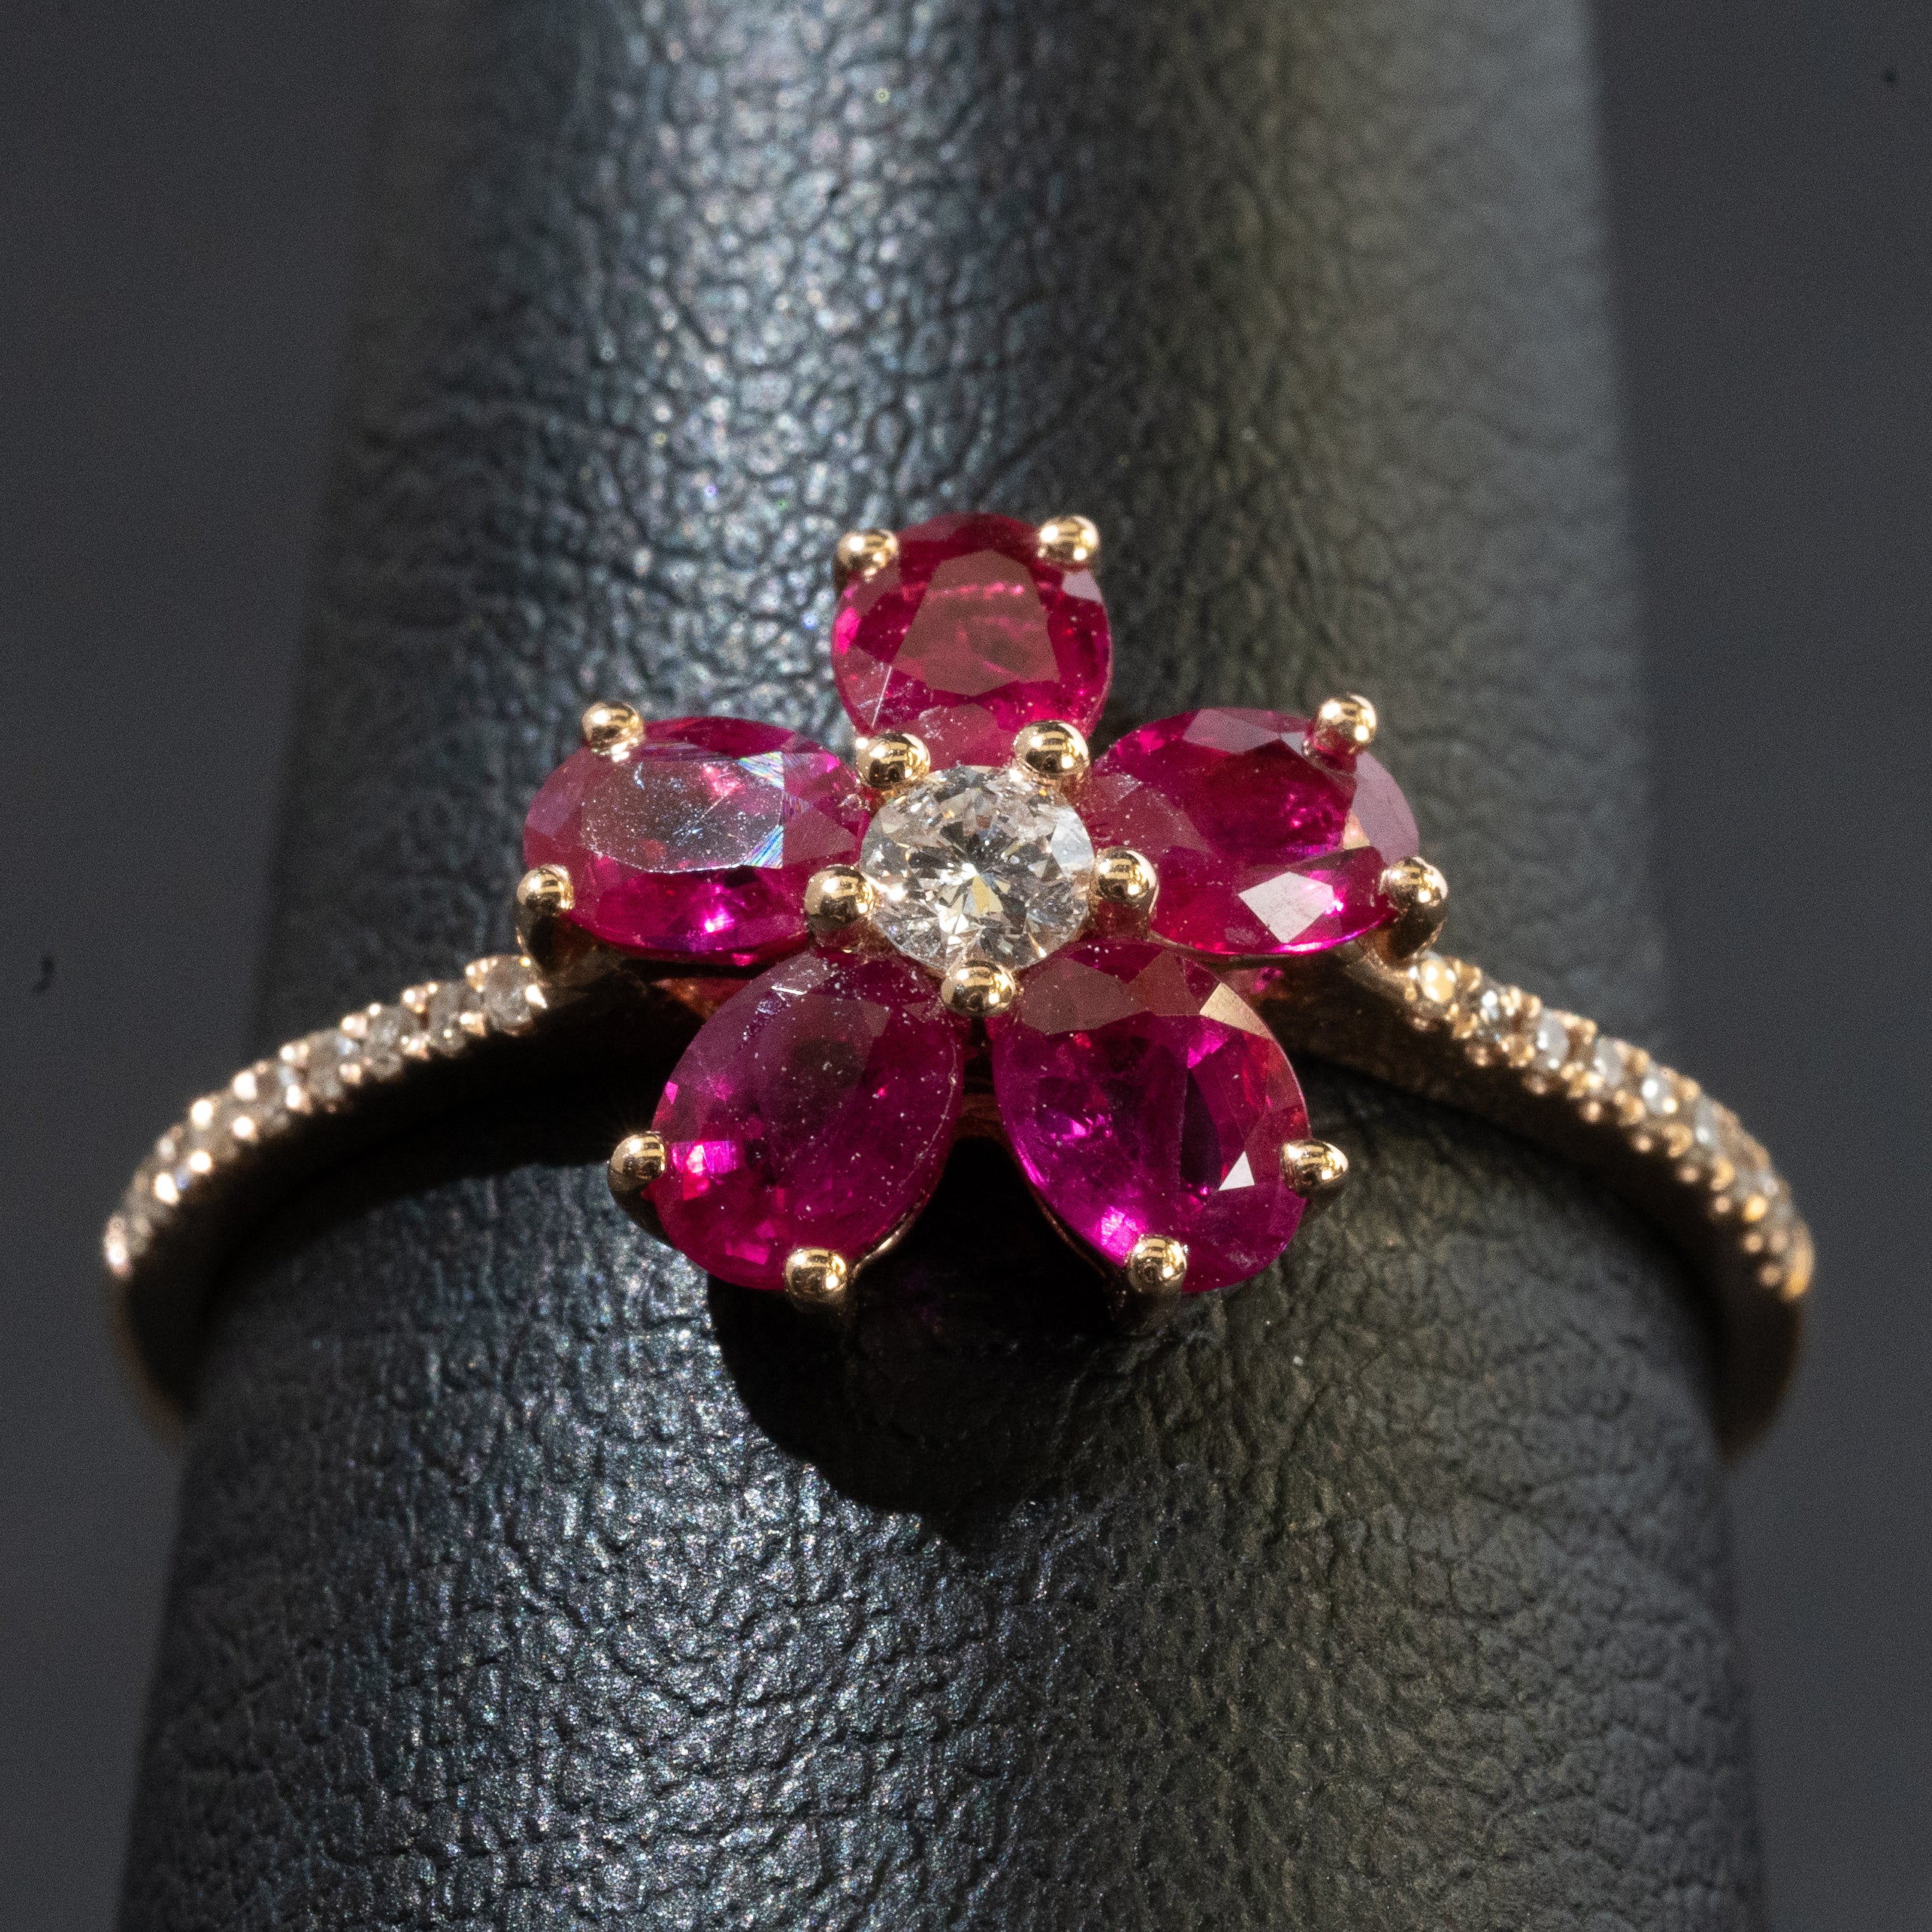 Ladies Oval Cut Ruby Ring / Rose Gold 14 Kt. - Anderson Jewelers 